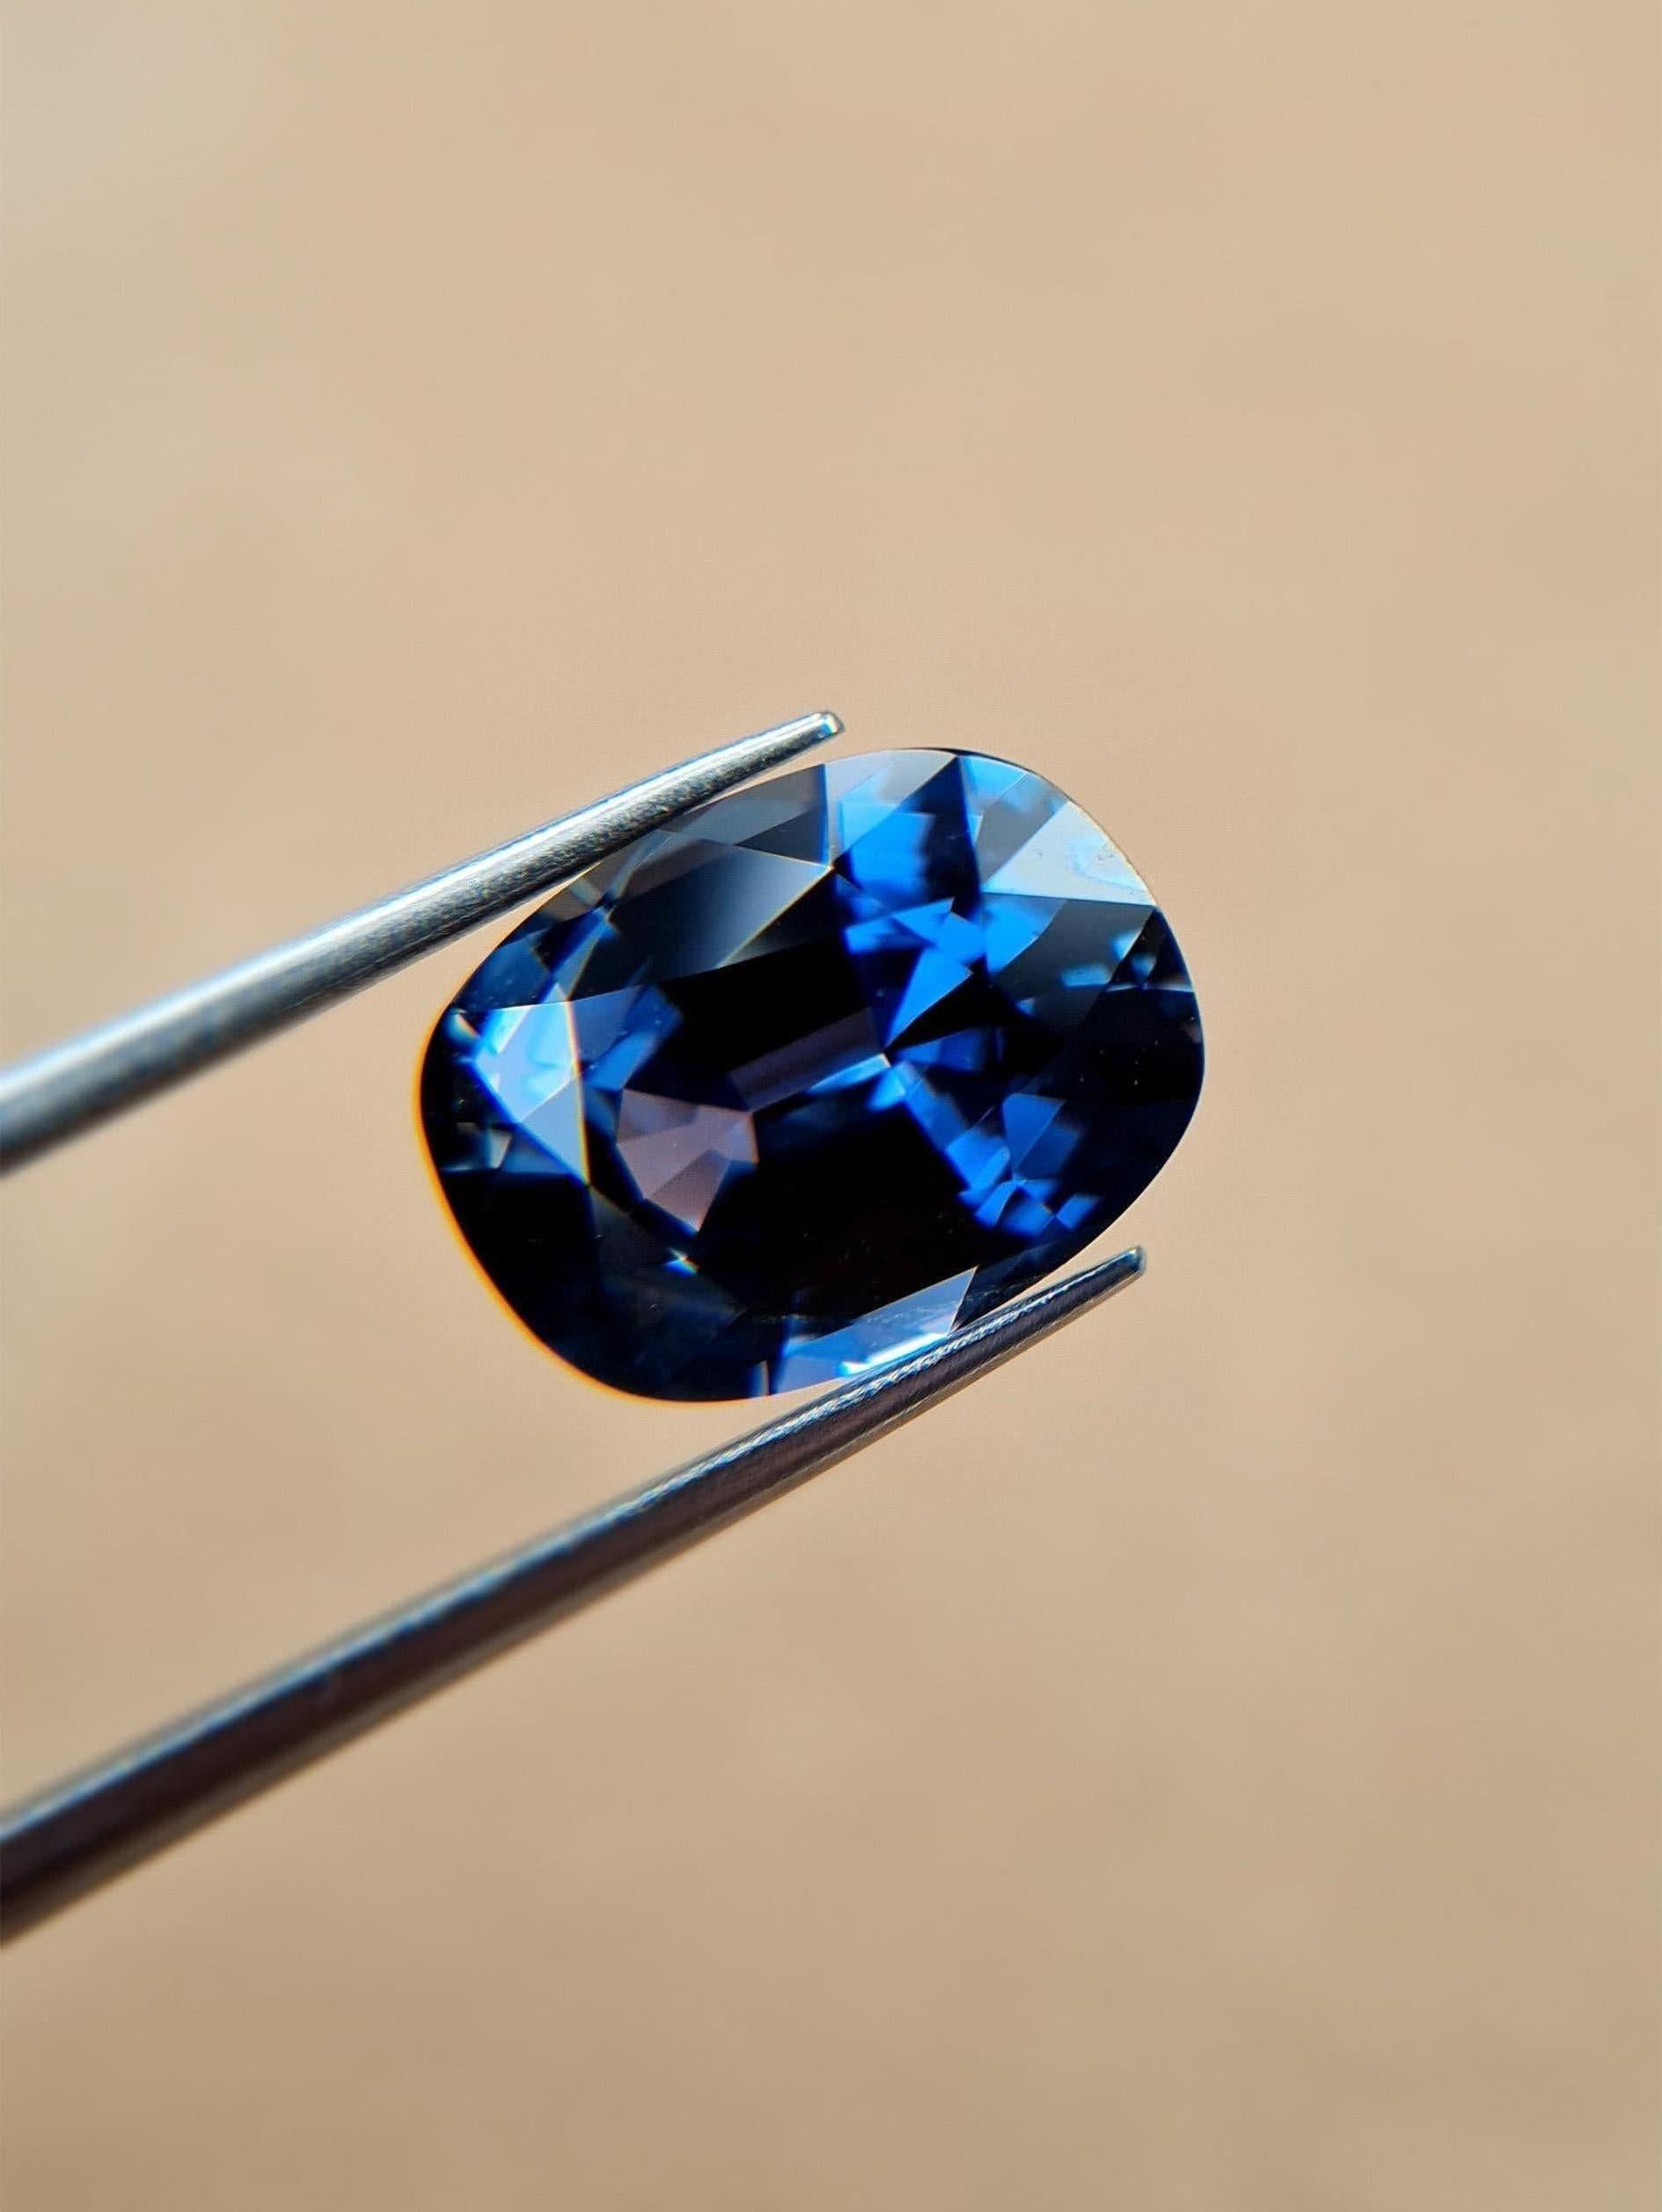 Superb 4.39 carat no heat natural cushion sapphire in a greenish-blue colour perfect for a one of a kind jewellery piece.

We specialise in colour gemstones and offer a bespoke jewellery service. The production time for bespoke pieces is usually 4-8